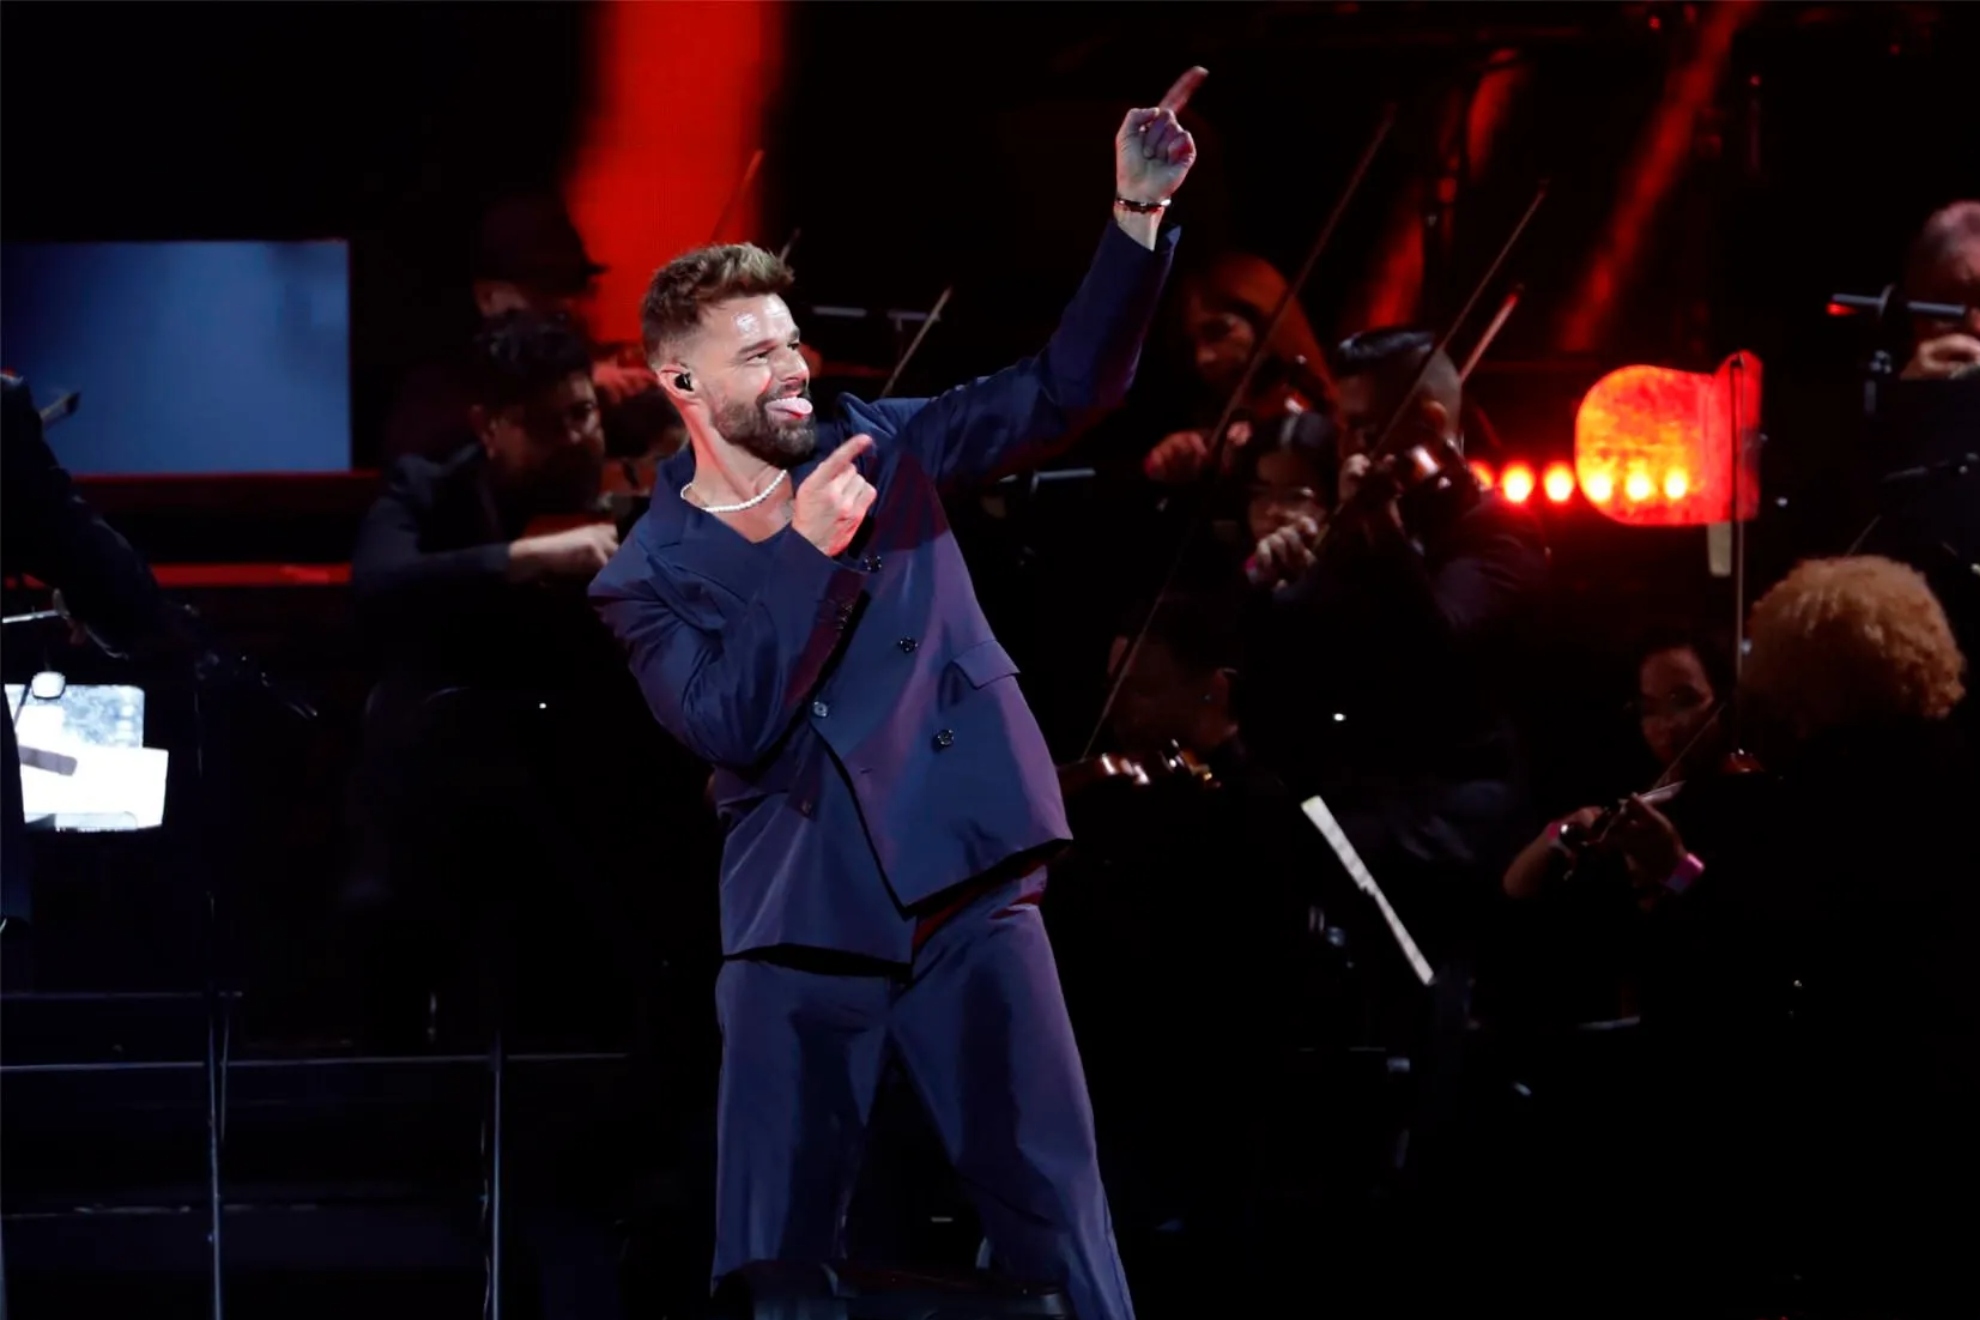 Ricky Martin during a concert